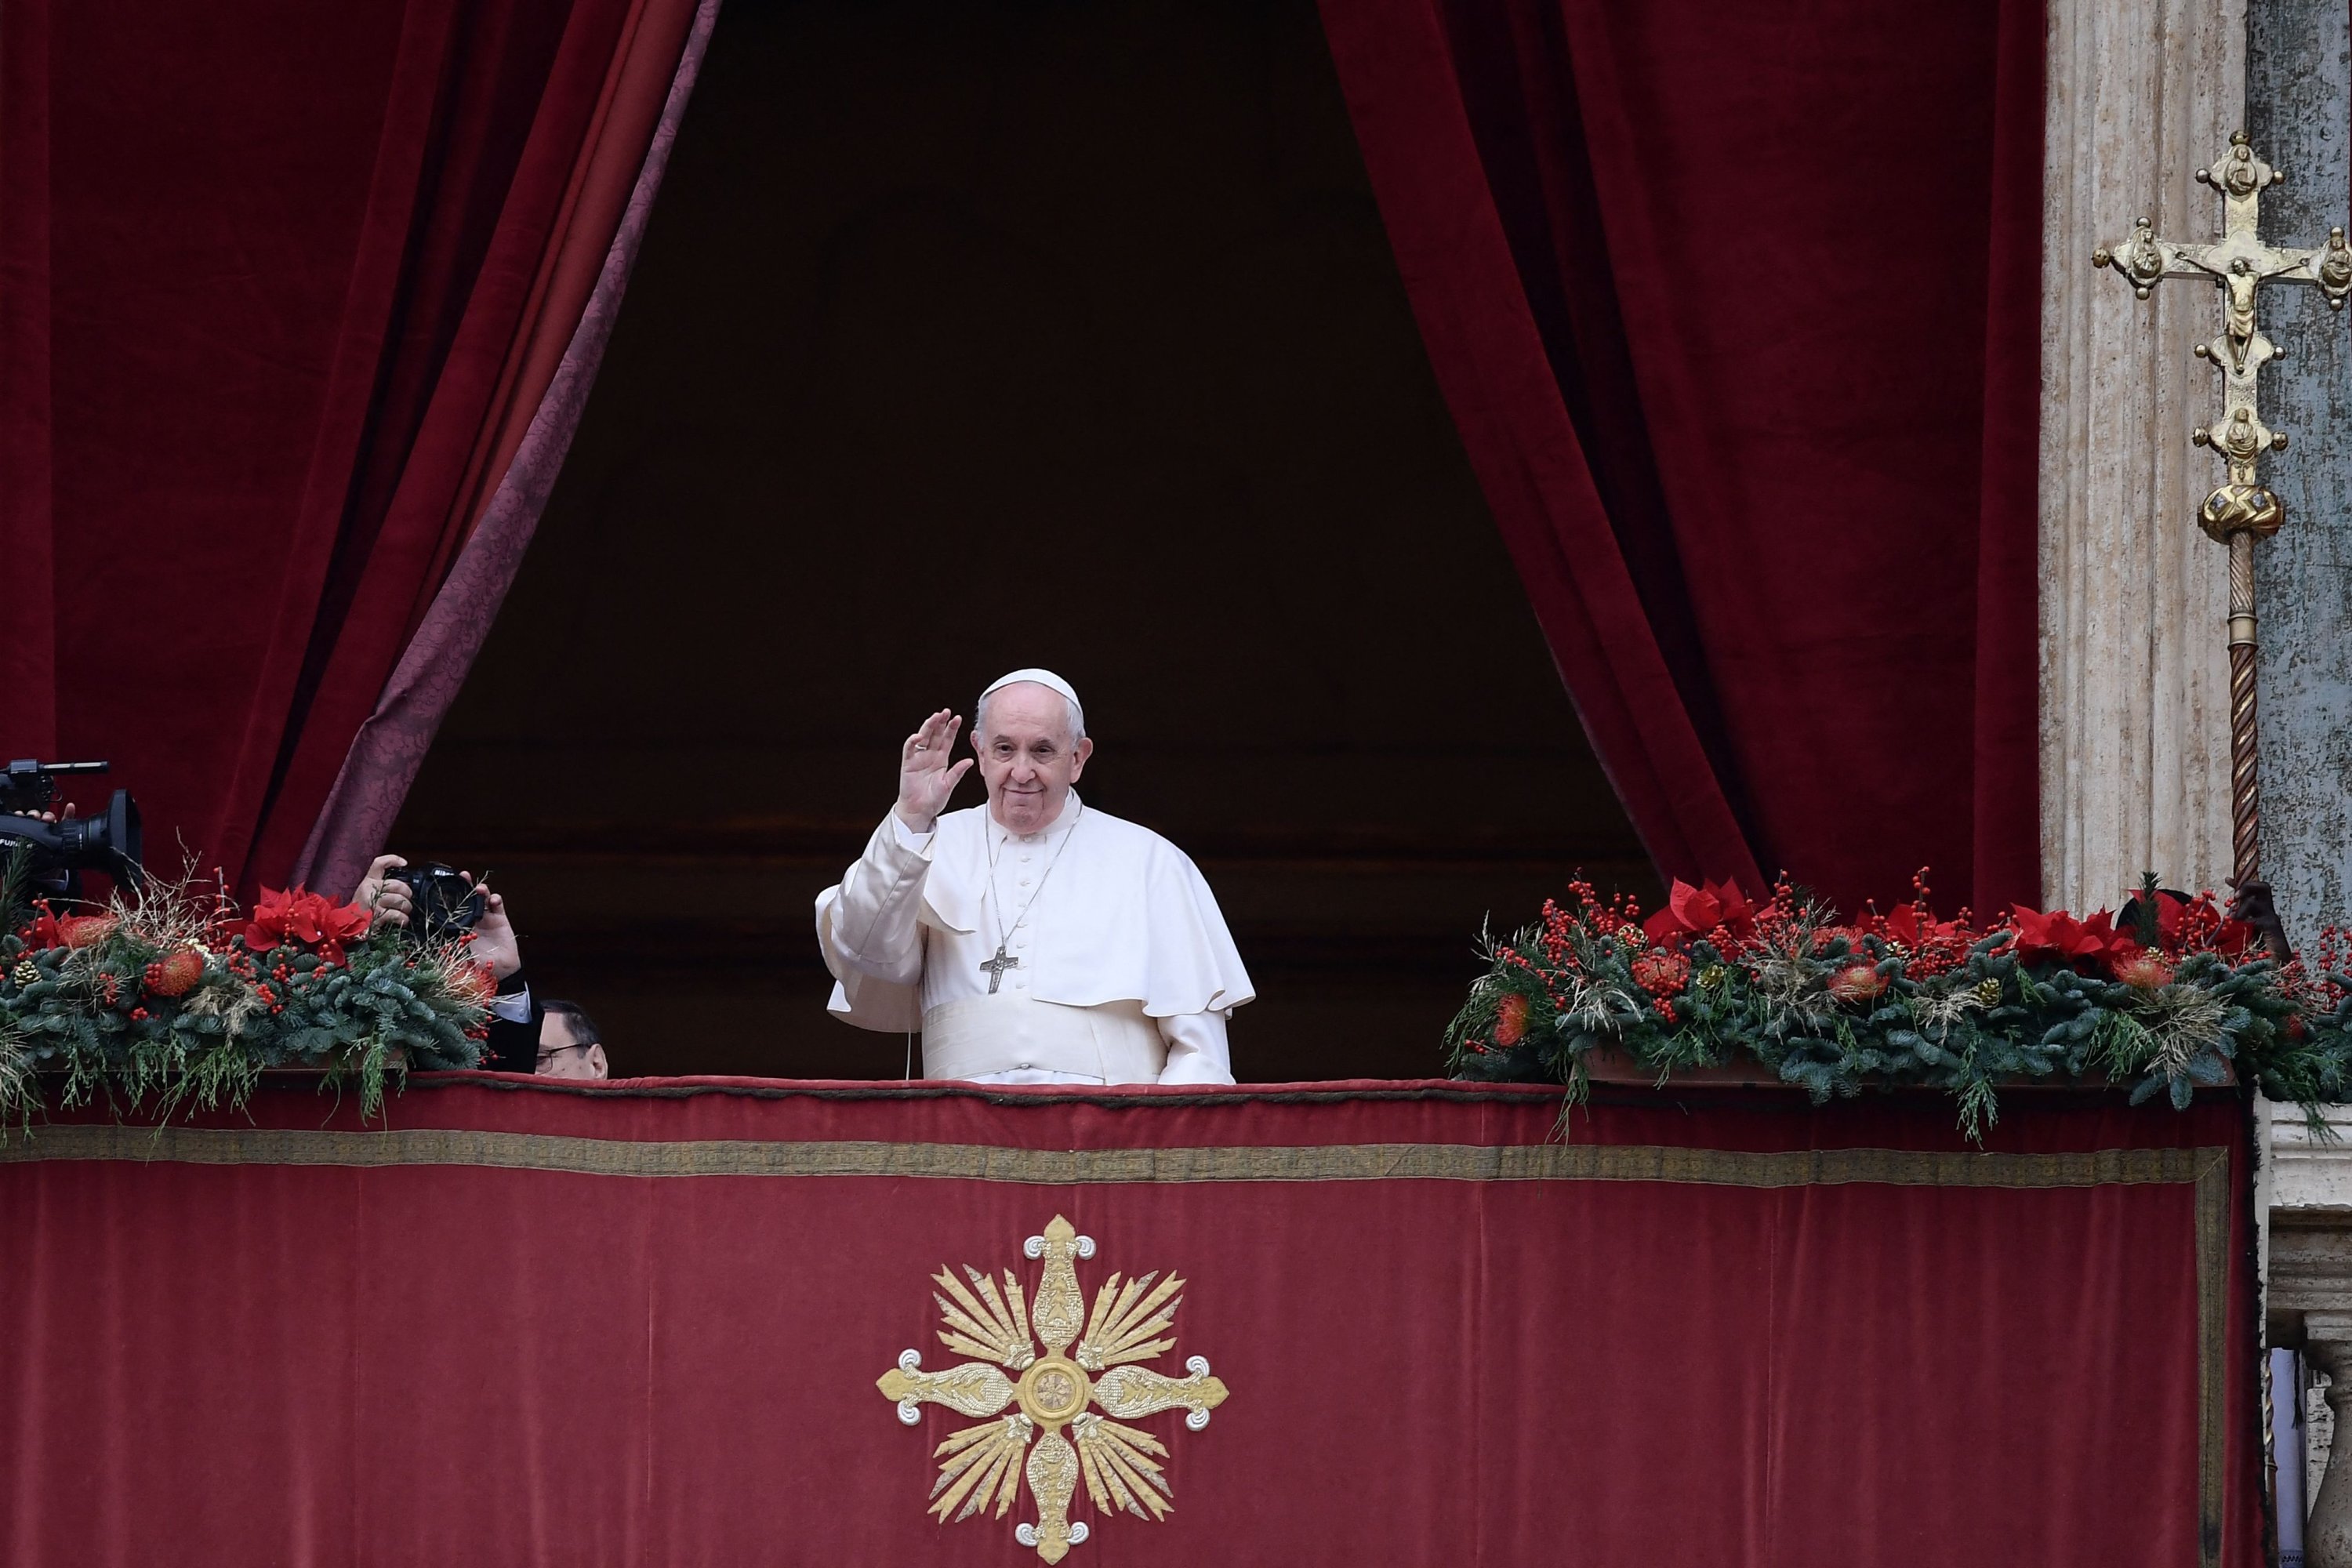 Pope Francis greets the gathered faithful during his Christmas Urbi et Orbi blessing in St. Peter's Square at The Vatican on Dec. 25, 2021. (AFP Photo)